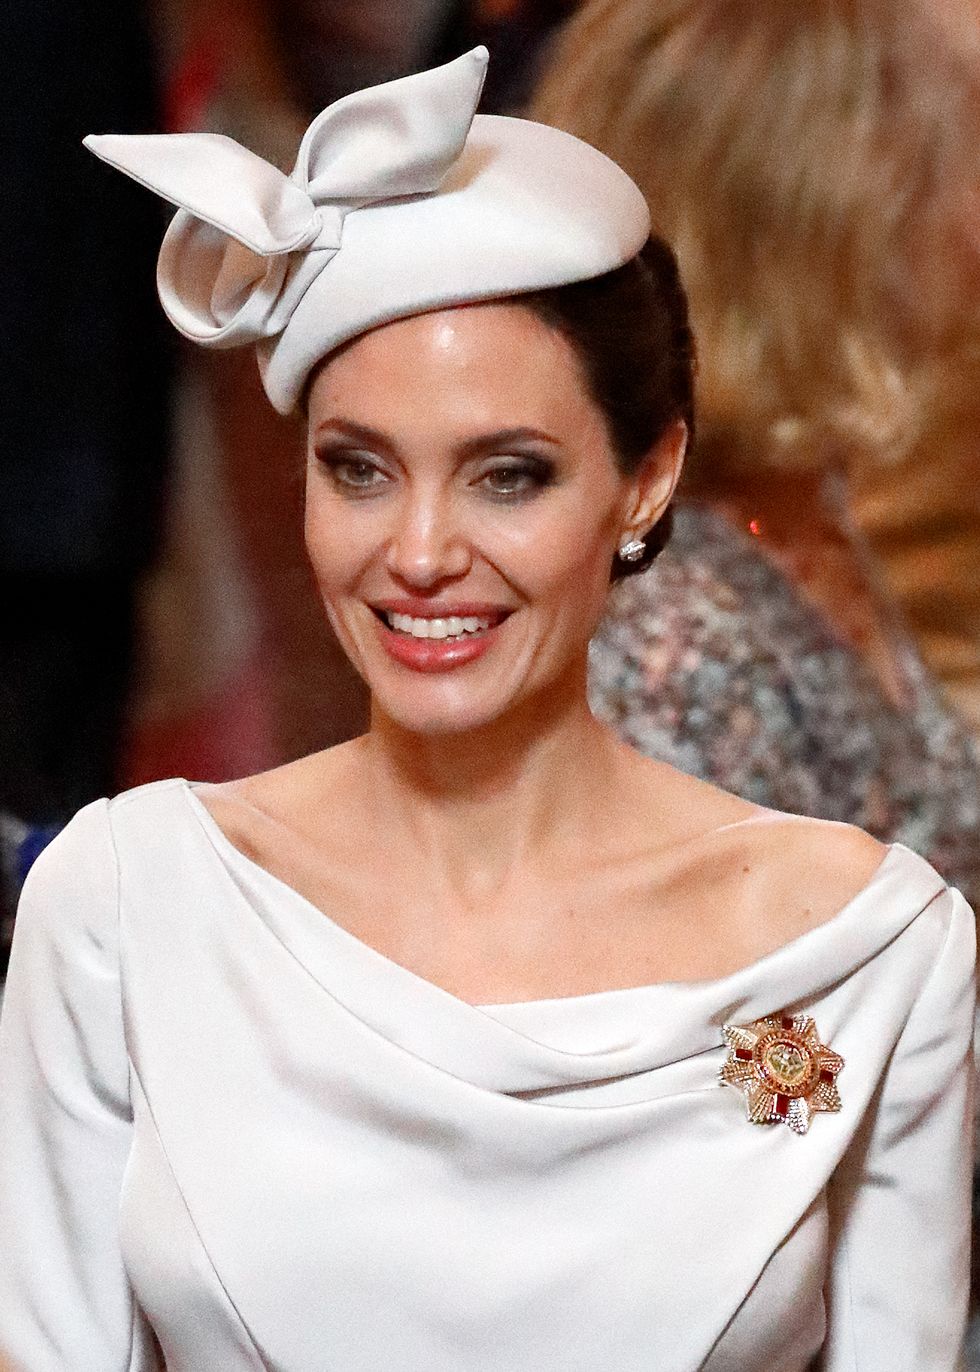 Angelina Jolie Attends A Service Marking The Most Distinguished Order Of St George